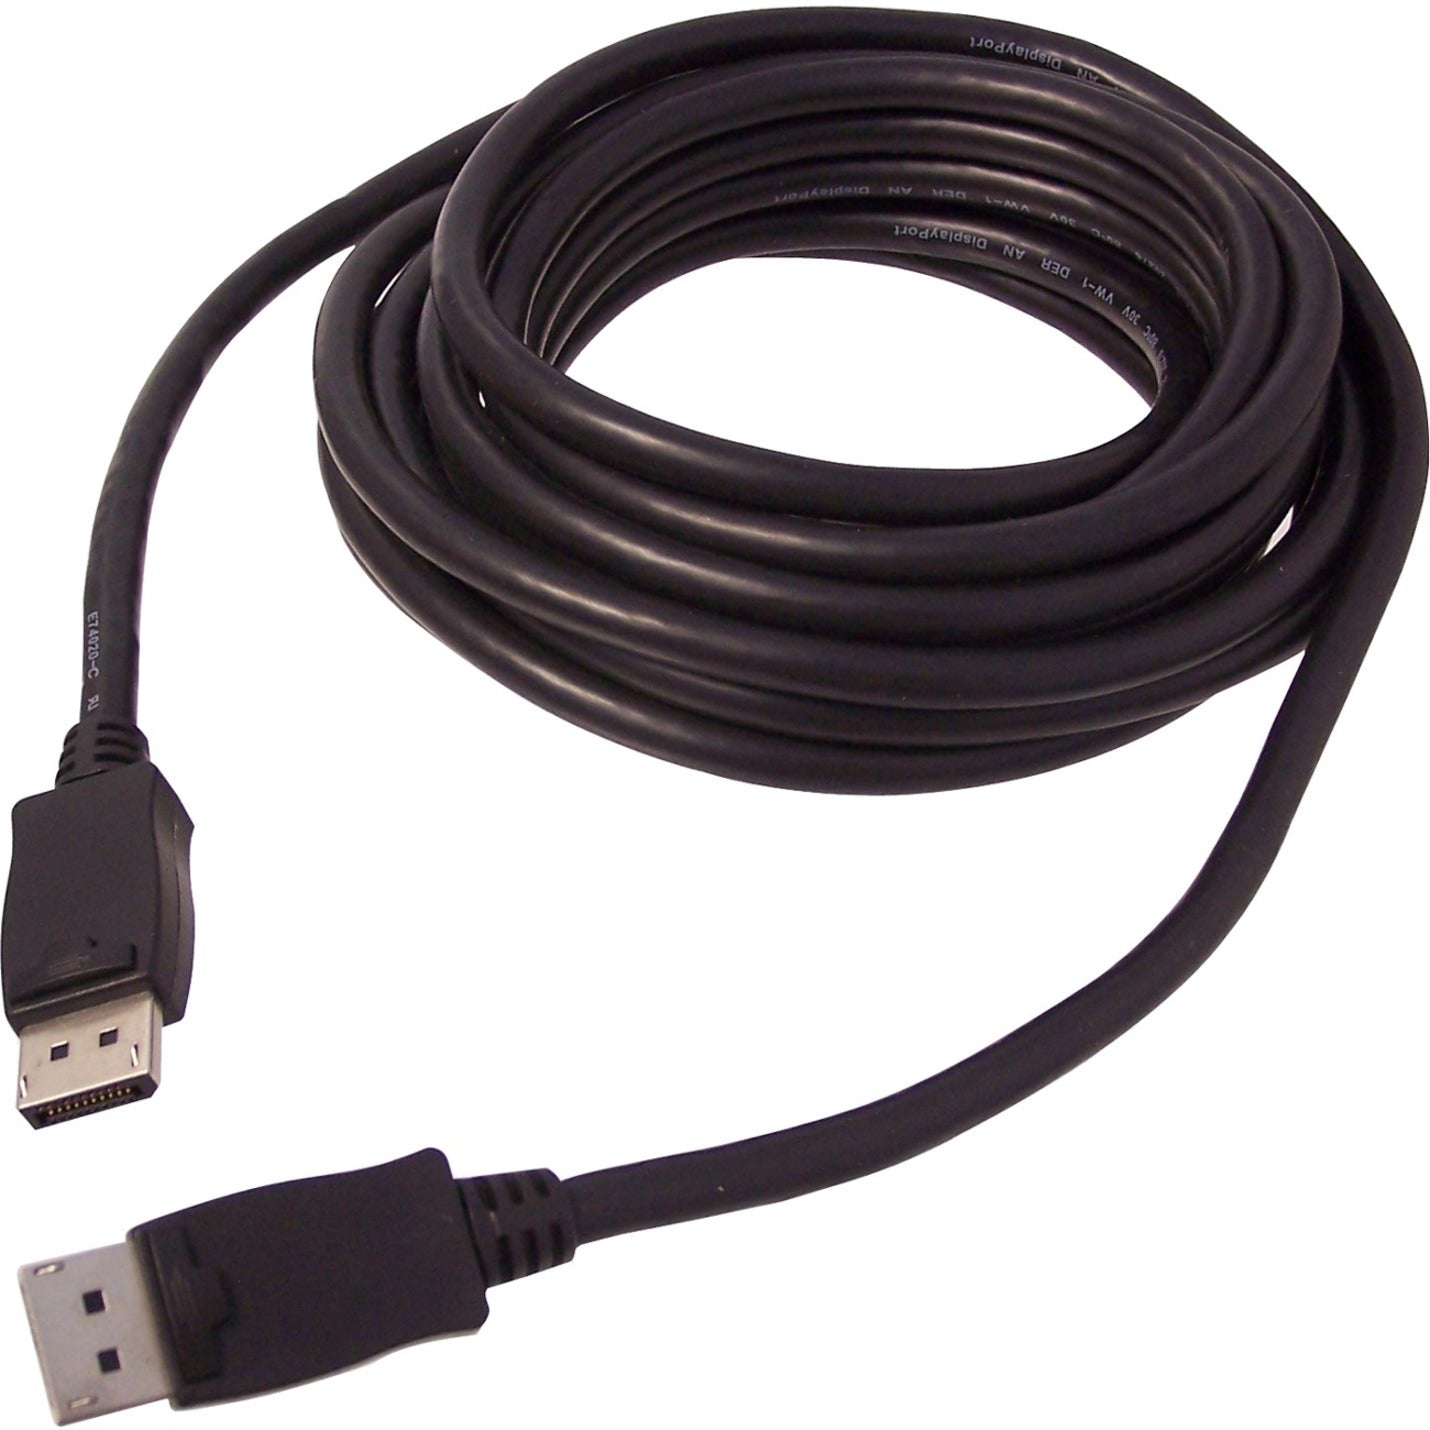 SIIG CB-DP0052-S1 DisplayPort Cable - 5M - 16.4ft, 4K Resolution, High-Speed Data Transfer